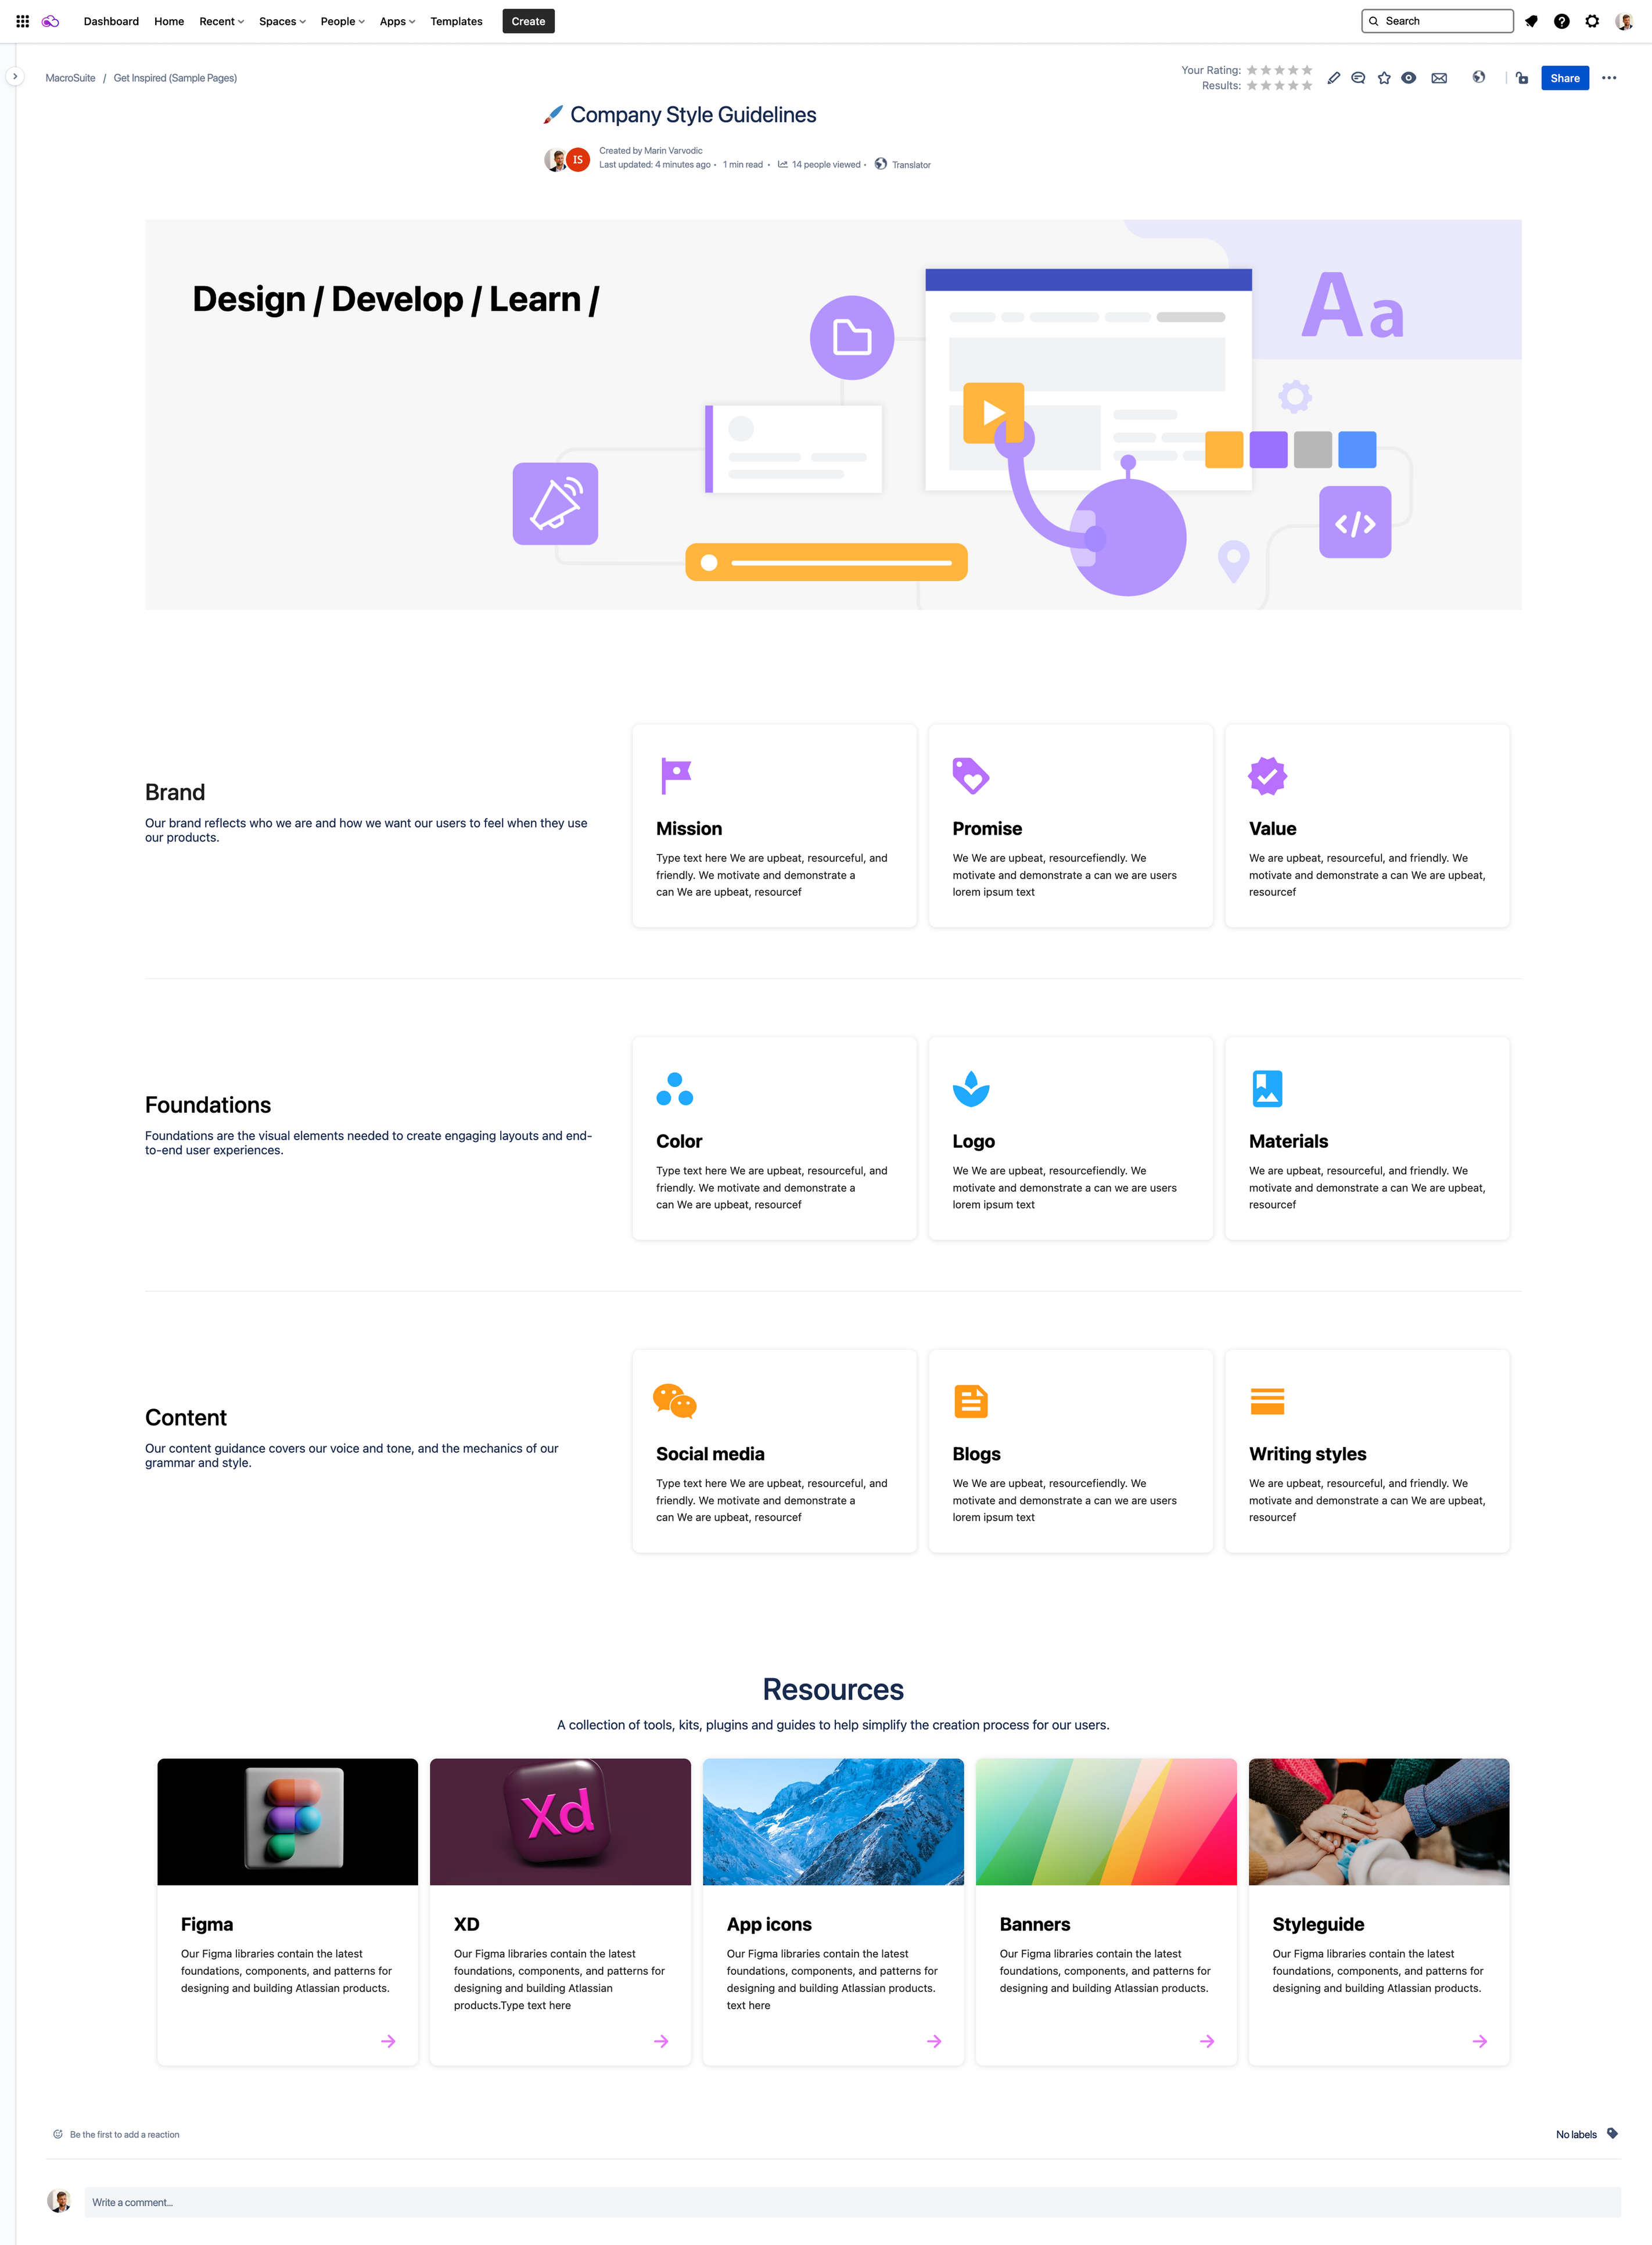 Overview of the Company style guide Confluence page